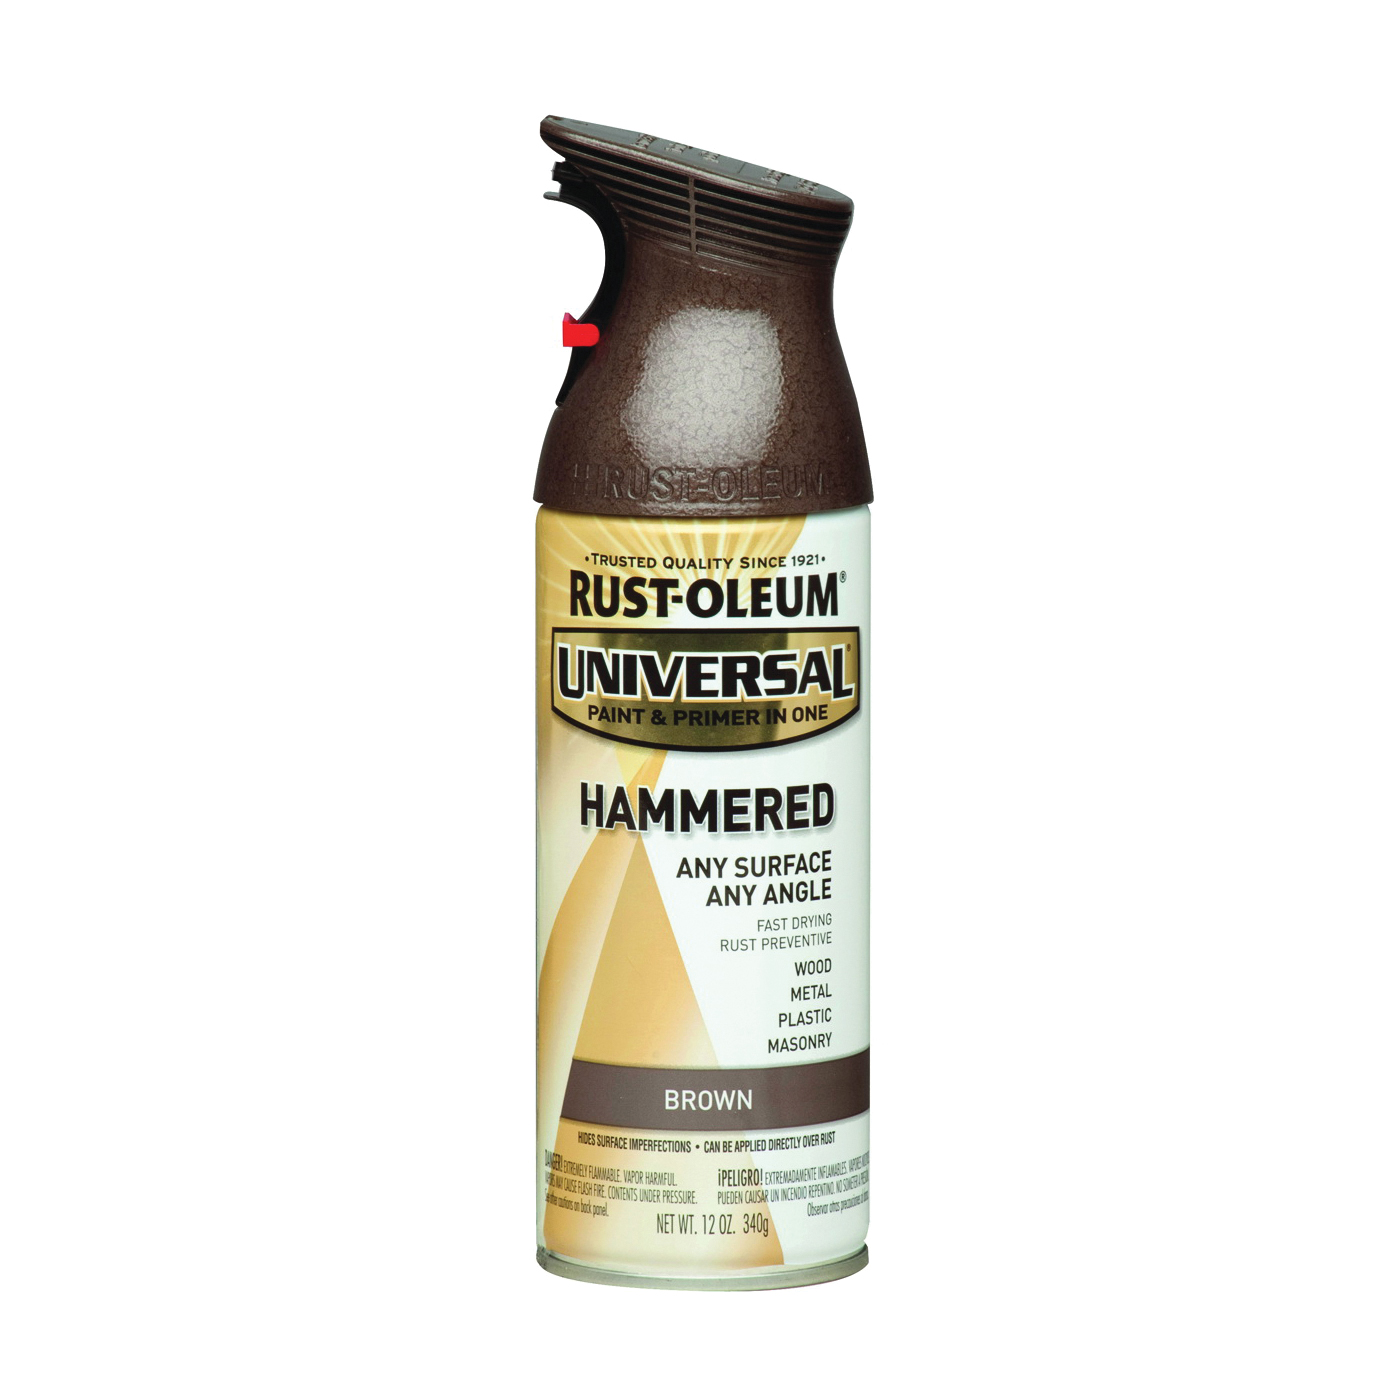 245218 Hammered Spray Paint, Hammered, Brown, 12 oz, Can